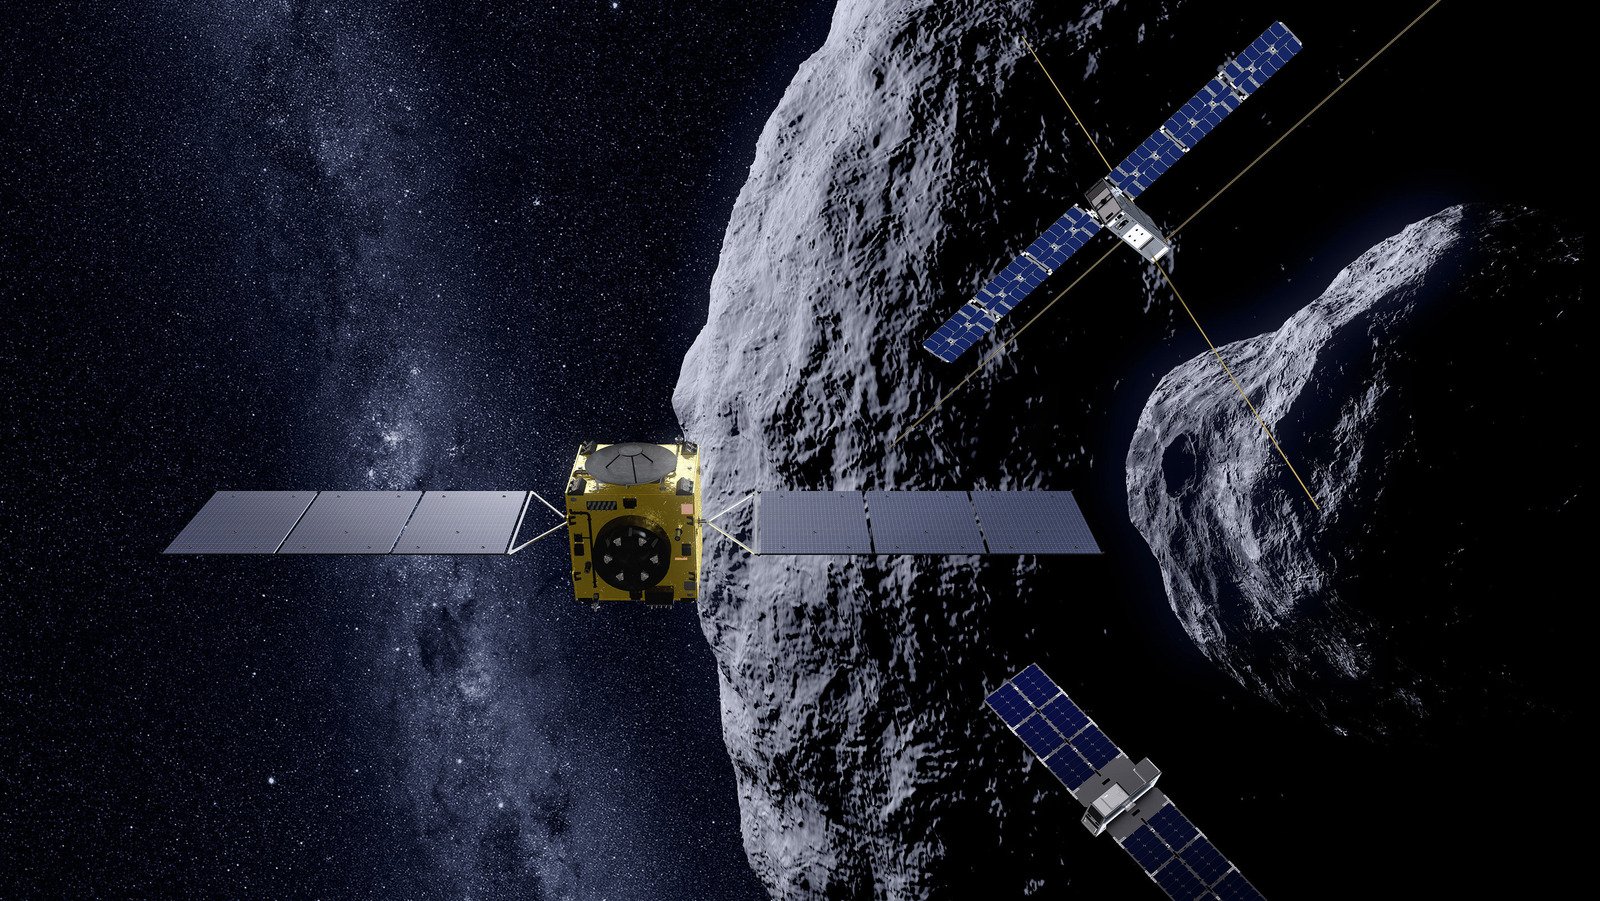 How The European Space Agency's Hera Mission Plans To Defend Earth From Asteroids